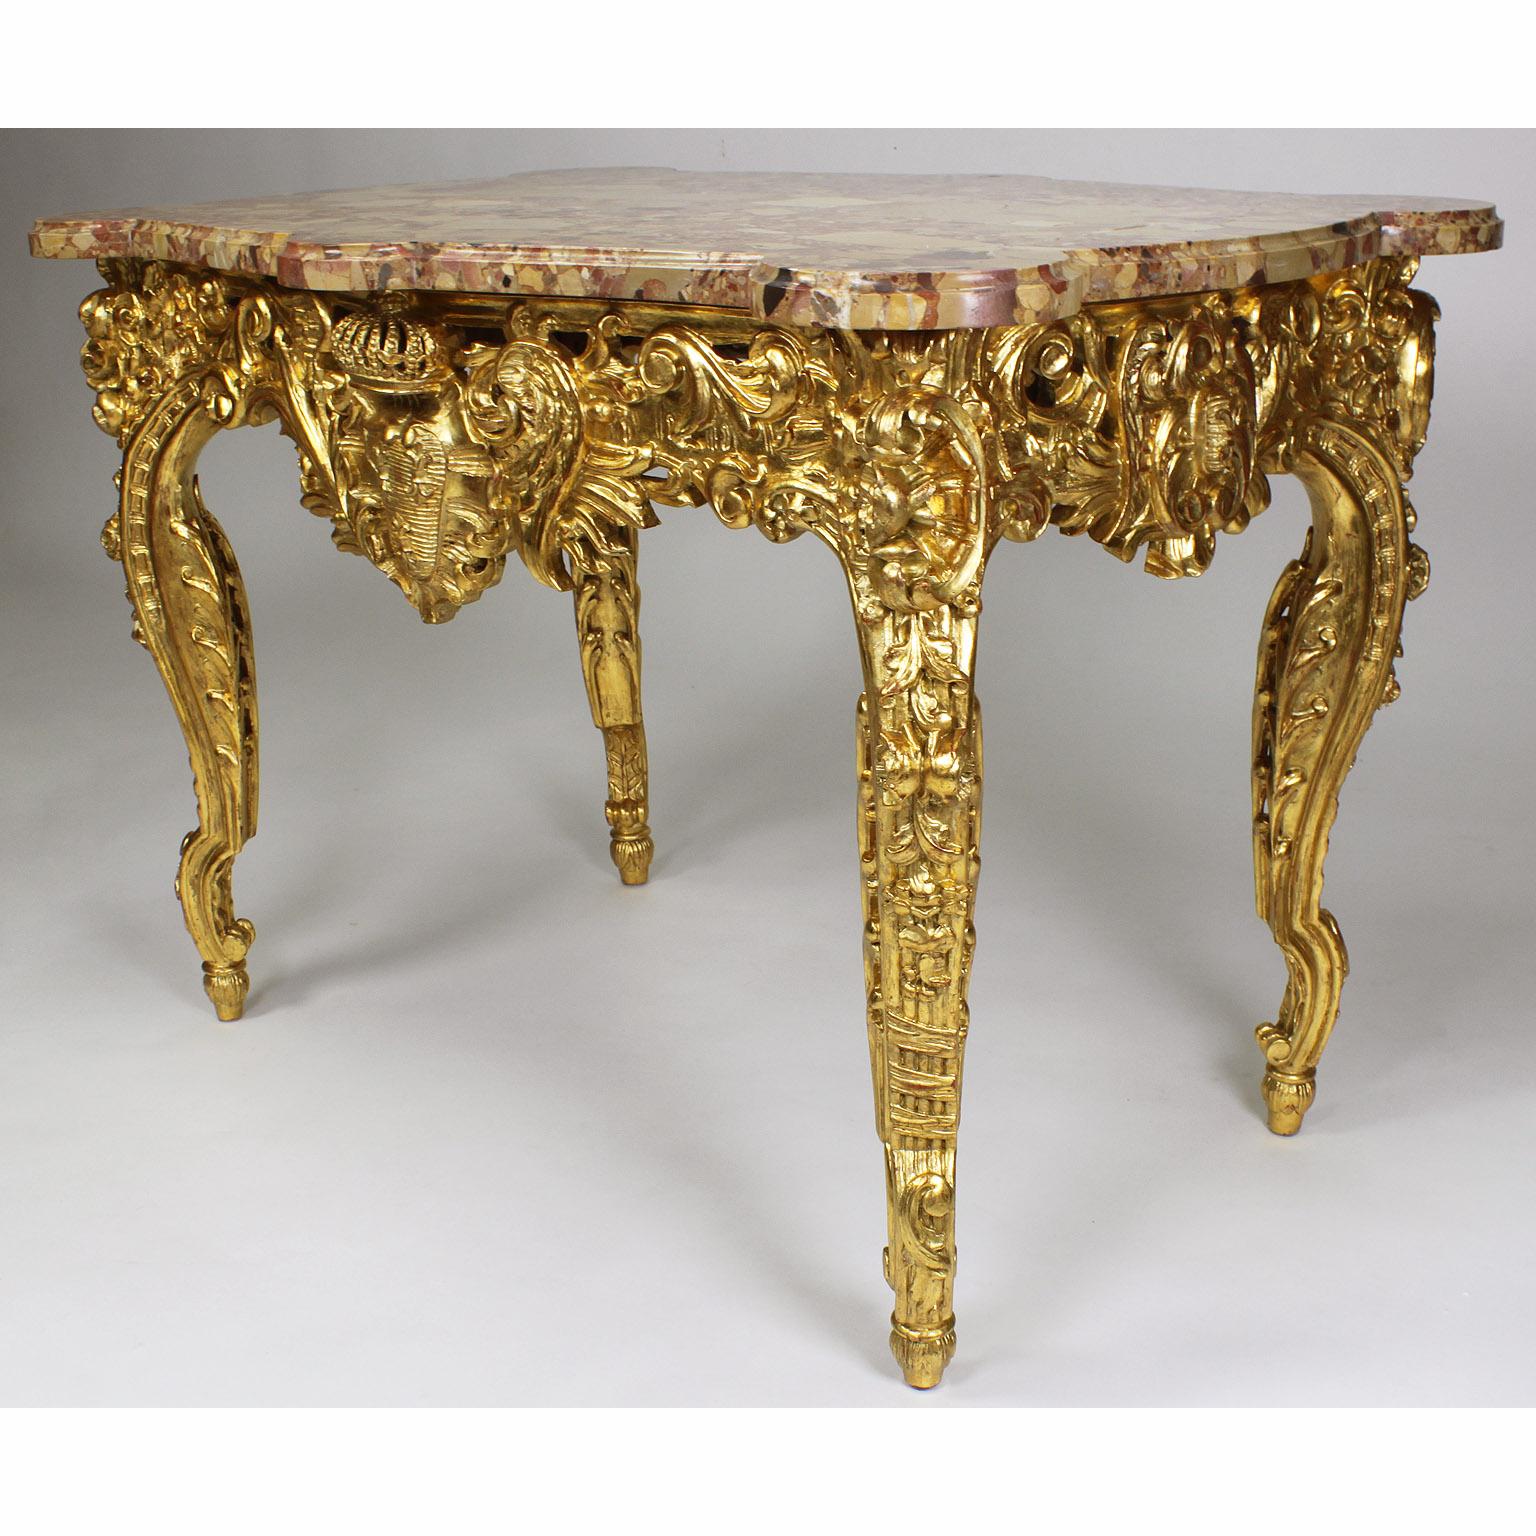 A very fine French 19th century Louis XV style giltwood carved 